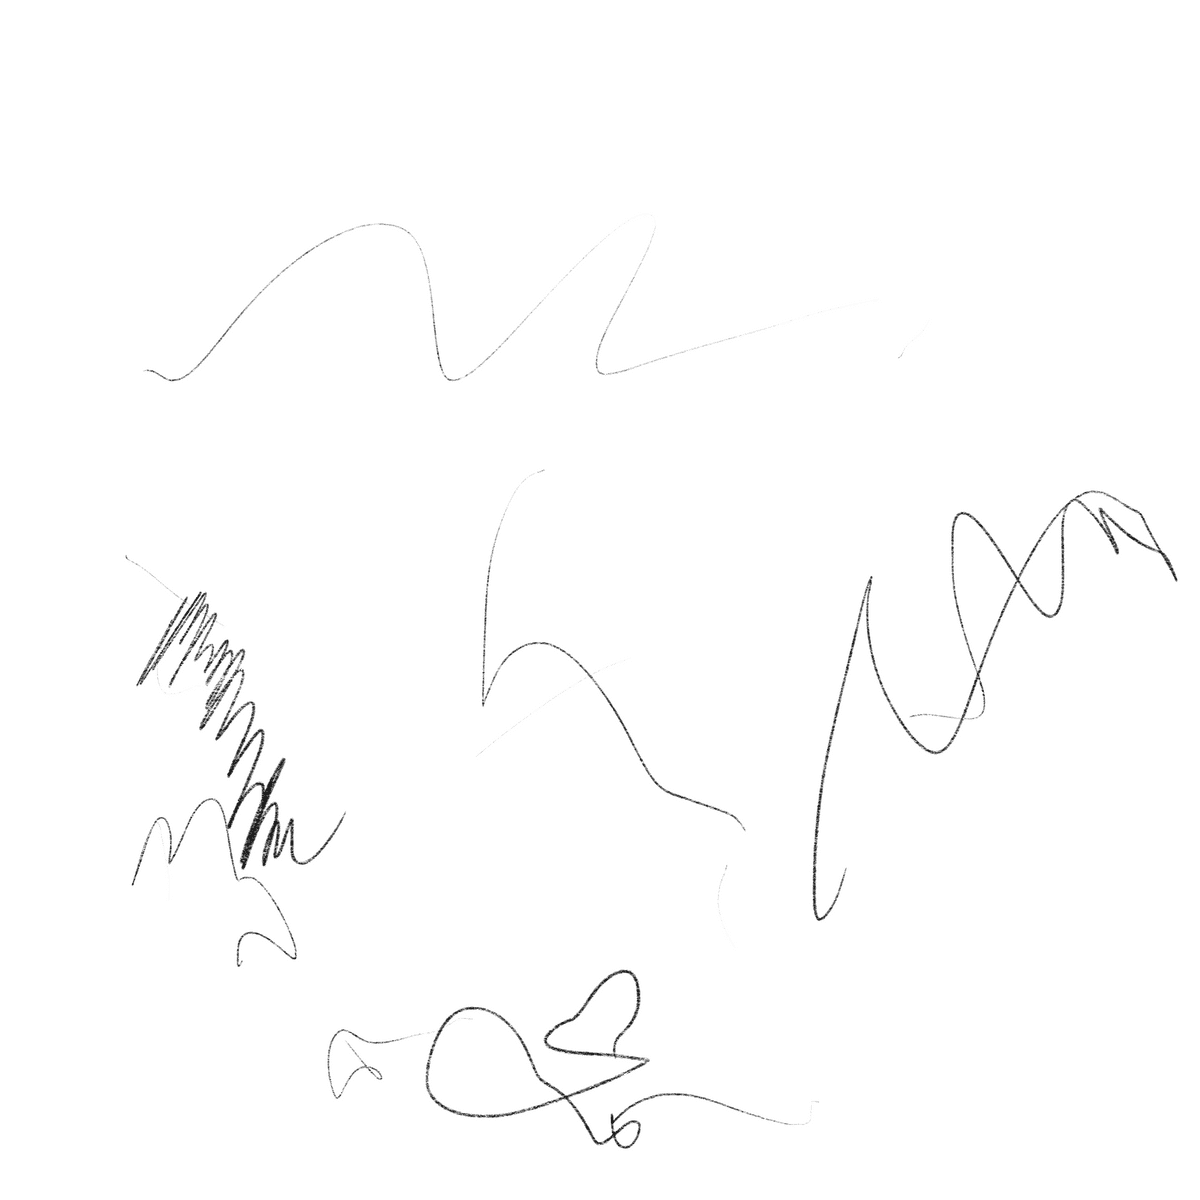 10 second drawing